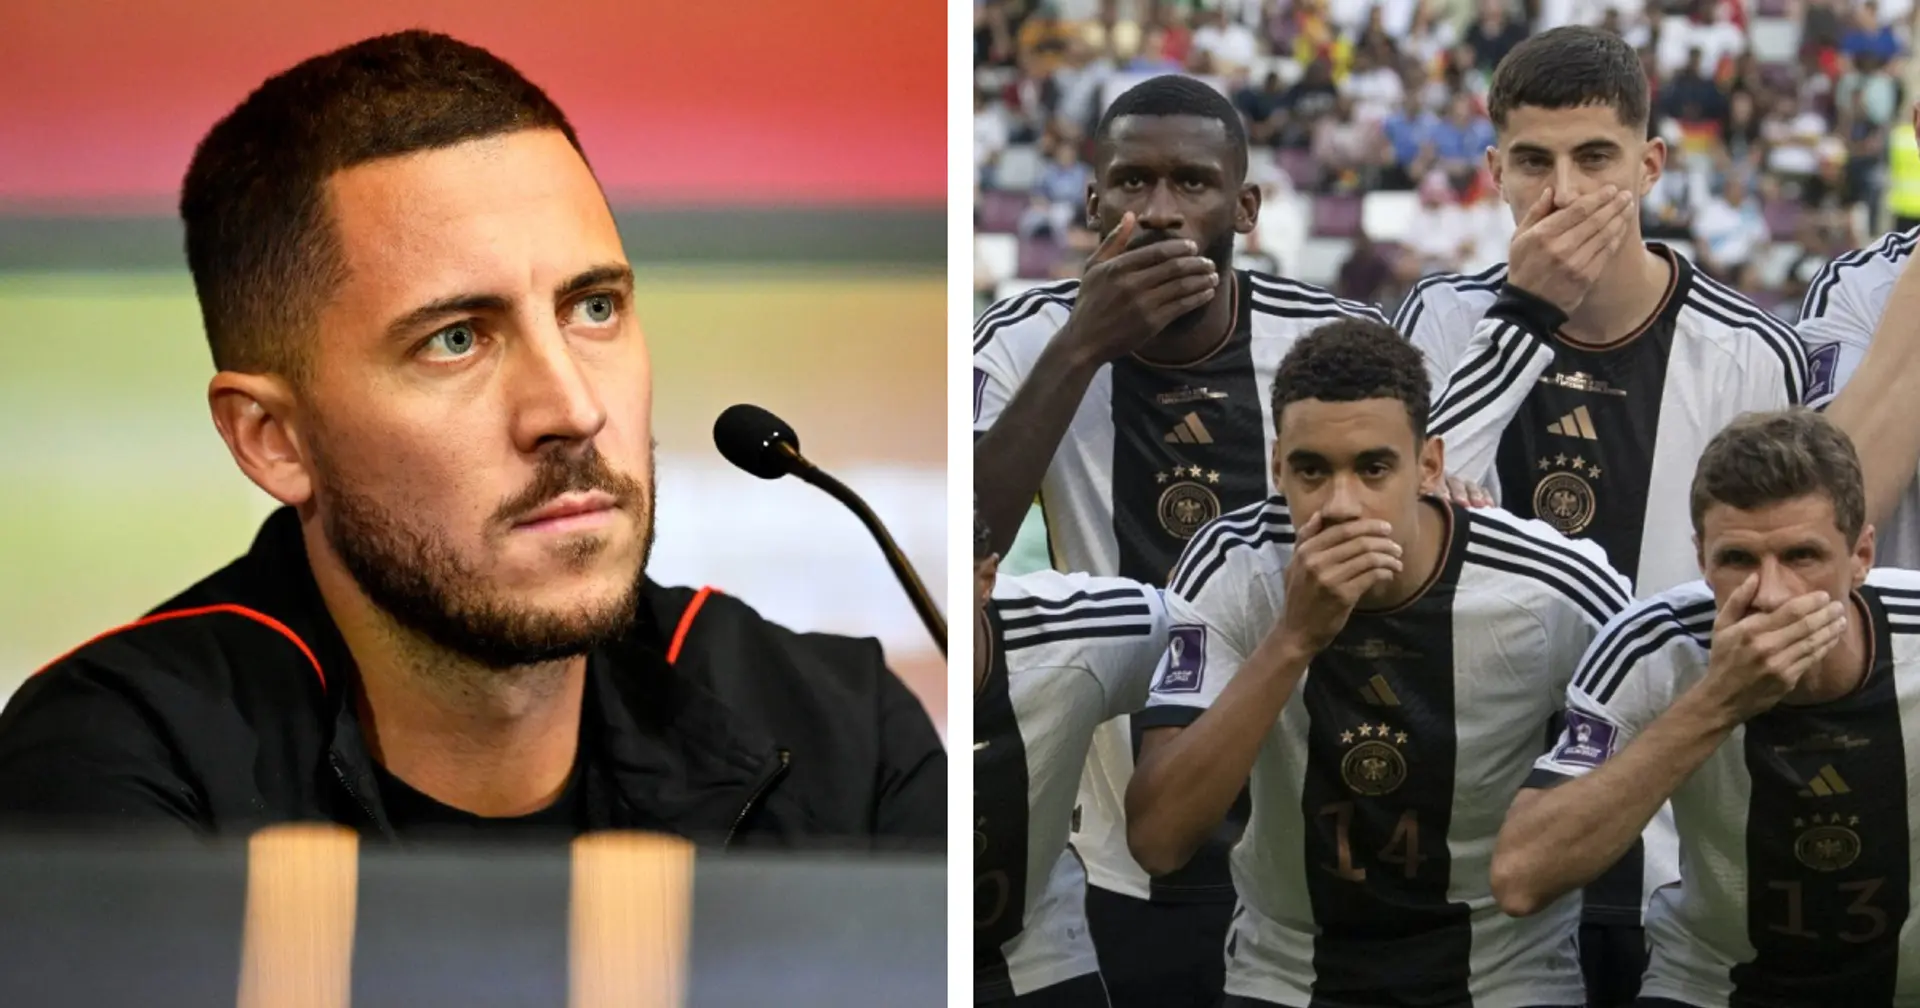 'They lost the game': Eden Hazard reacts to gesture Kai Havertz and Germany teammates made before Japan defeat